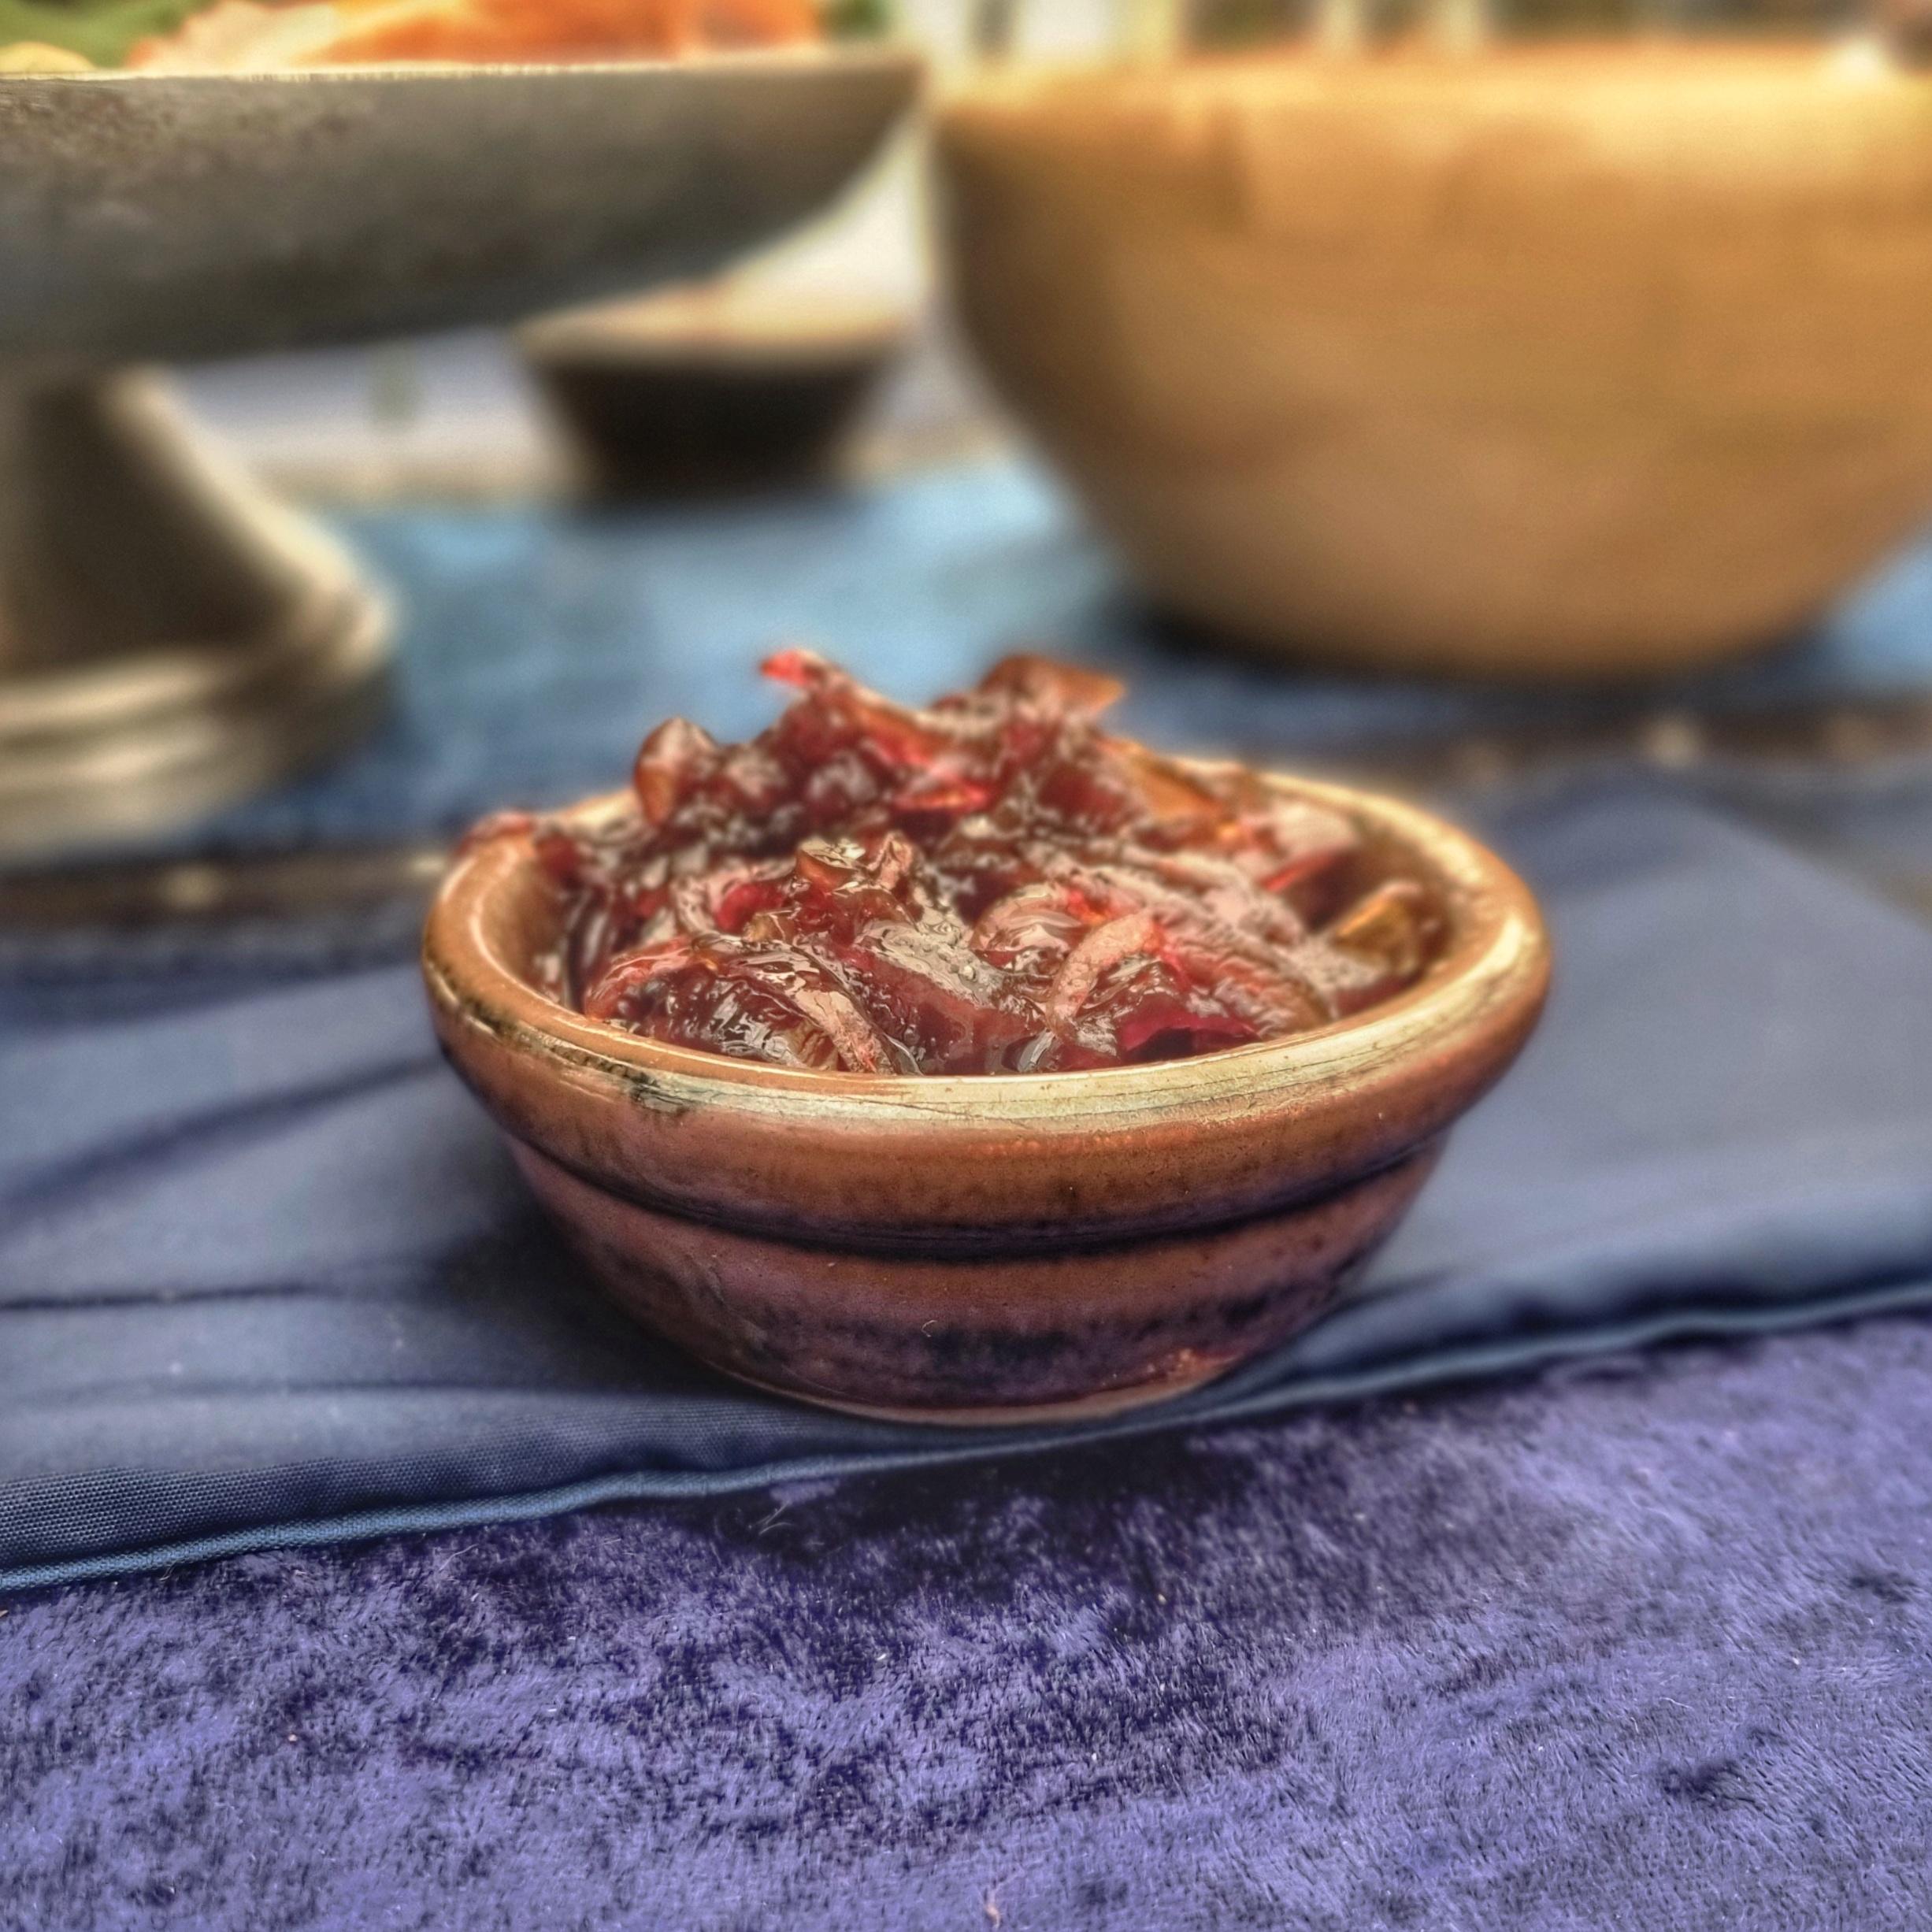 Mini Earthenware dish, here filled with red onion chutney. On blue tablecloth and runner